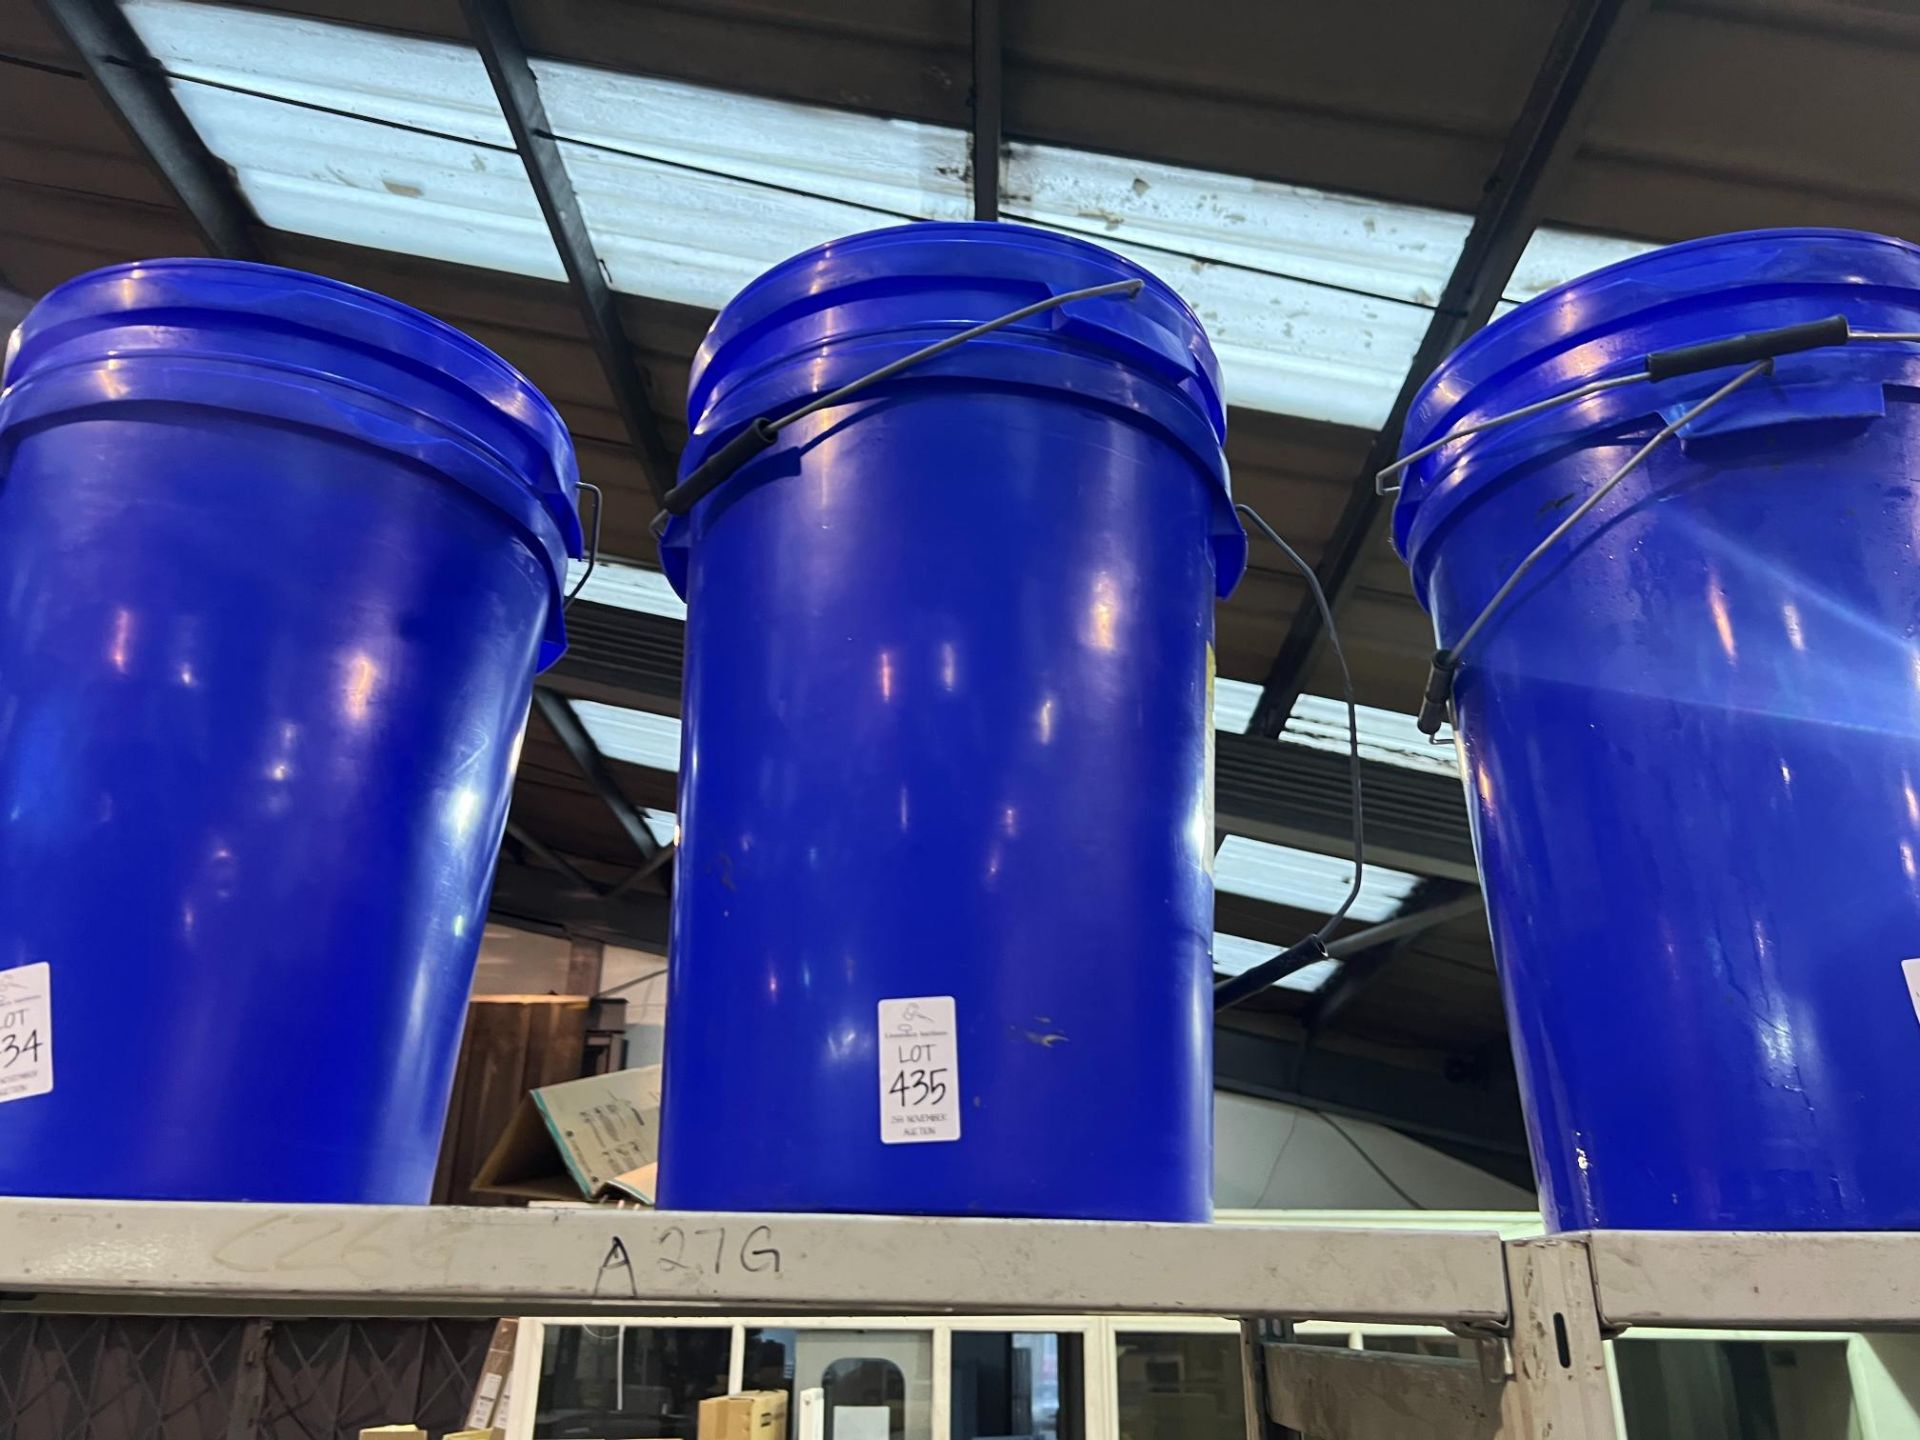 2X BLUE PLASTIC BUCKETS WITHH HANDLES